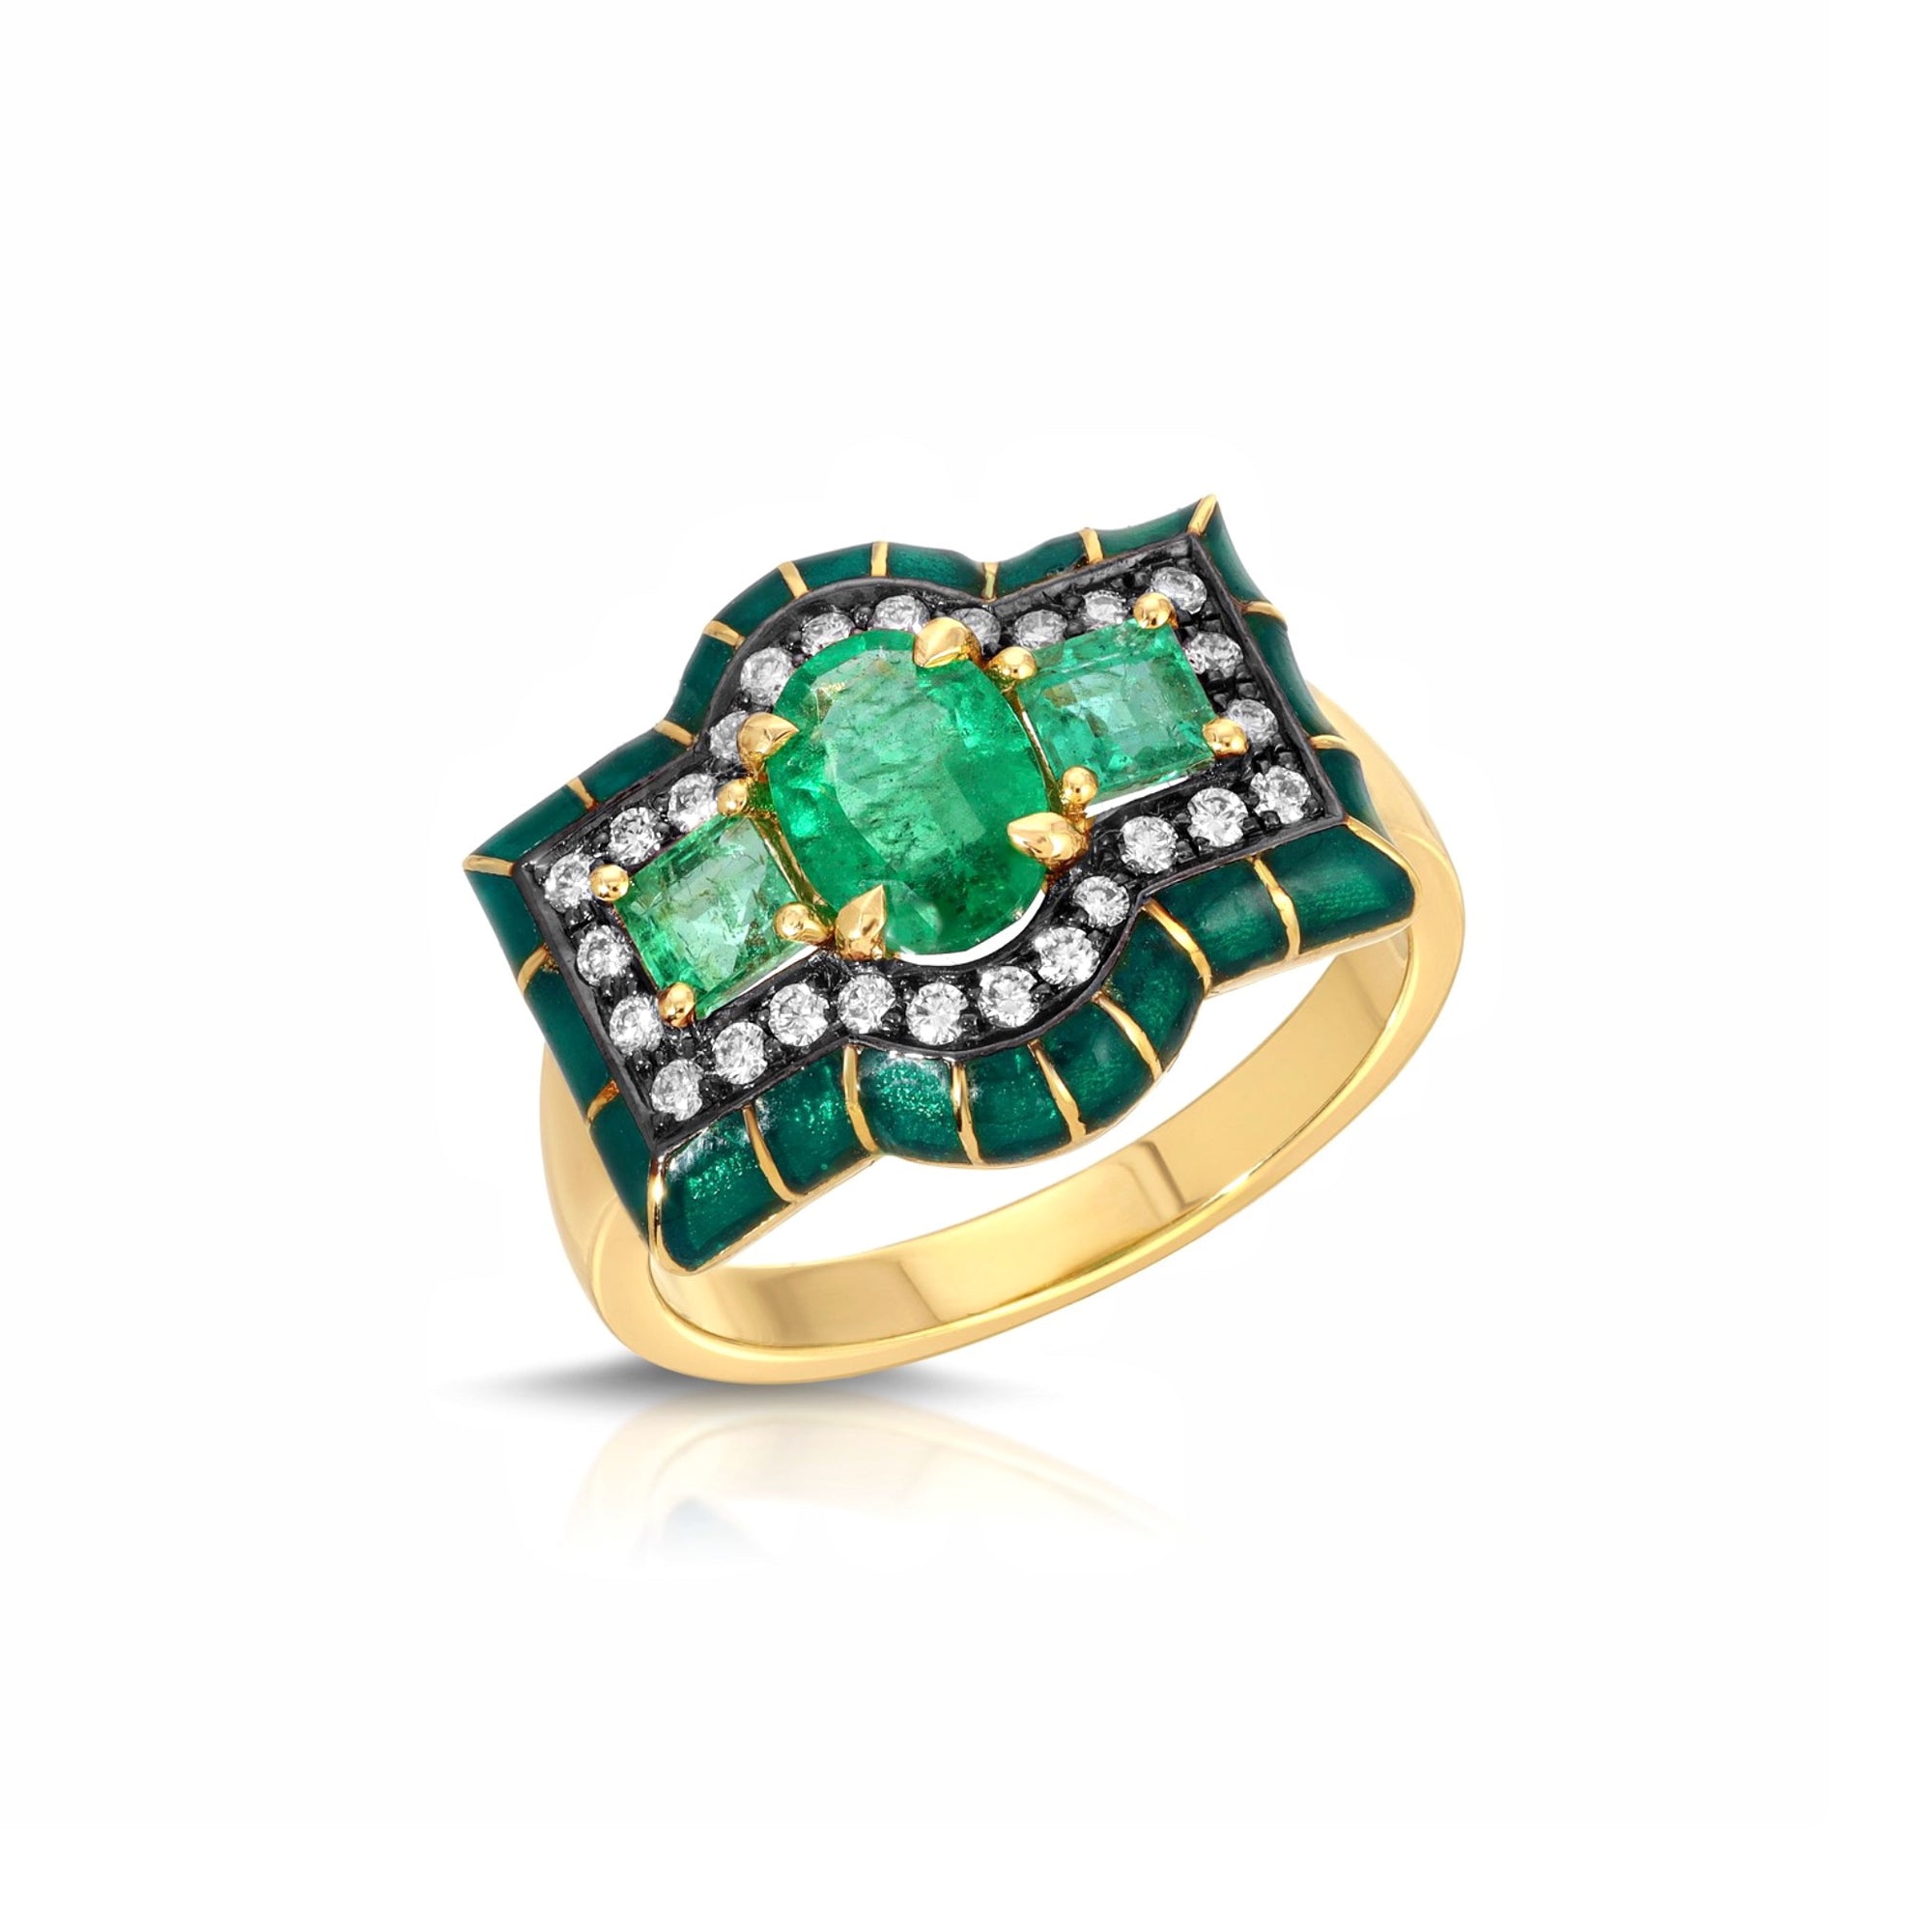 Triple Emerald Ring by Lord Jewelry available at Talisman Collection Fine Jewelers in El Dorado Hills, CA and online. Green is the color of envy for a reason… This gorgeous 18-karat gold cocktail ring features a central oval-cut emerald flanked by two princess-cut emeralds, and is surrounded by 0.20 carats of diamonds and deep green enamel. Don't wait for a special occasion to wear this ring!